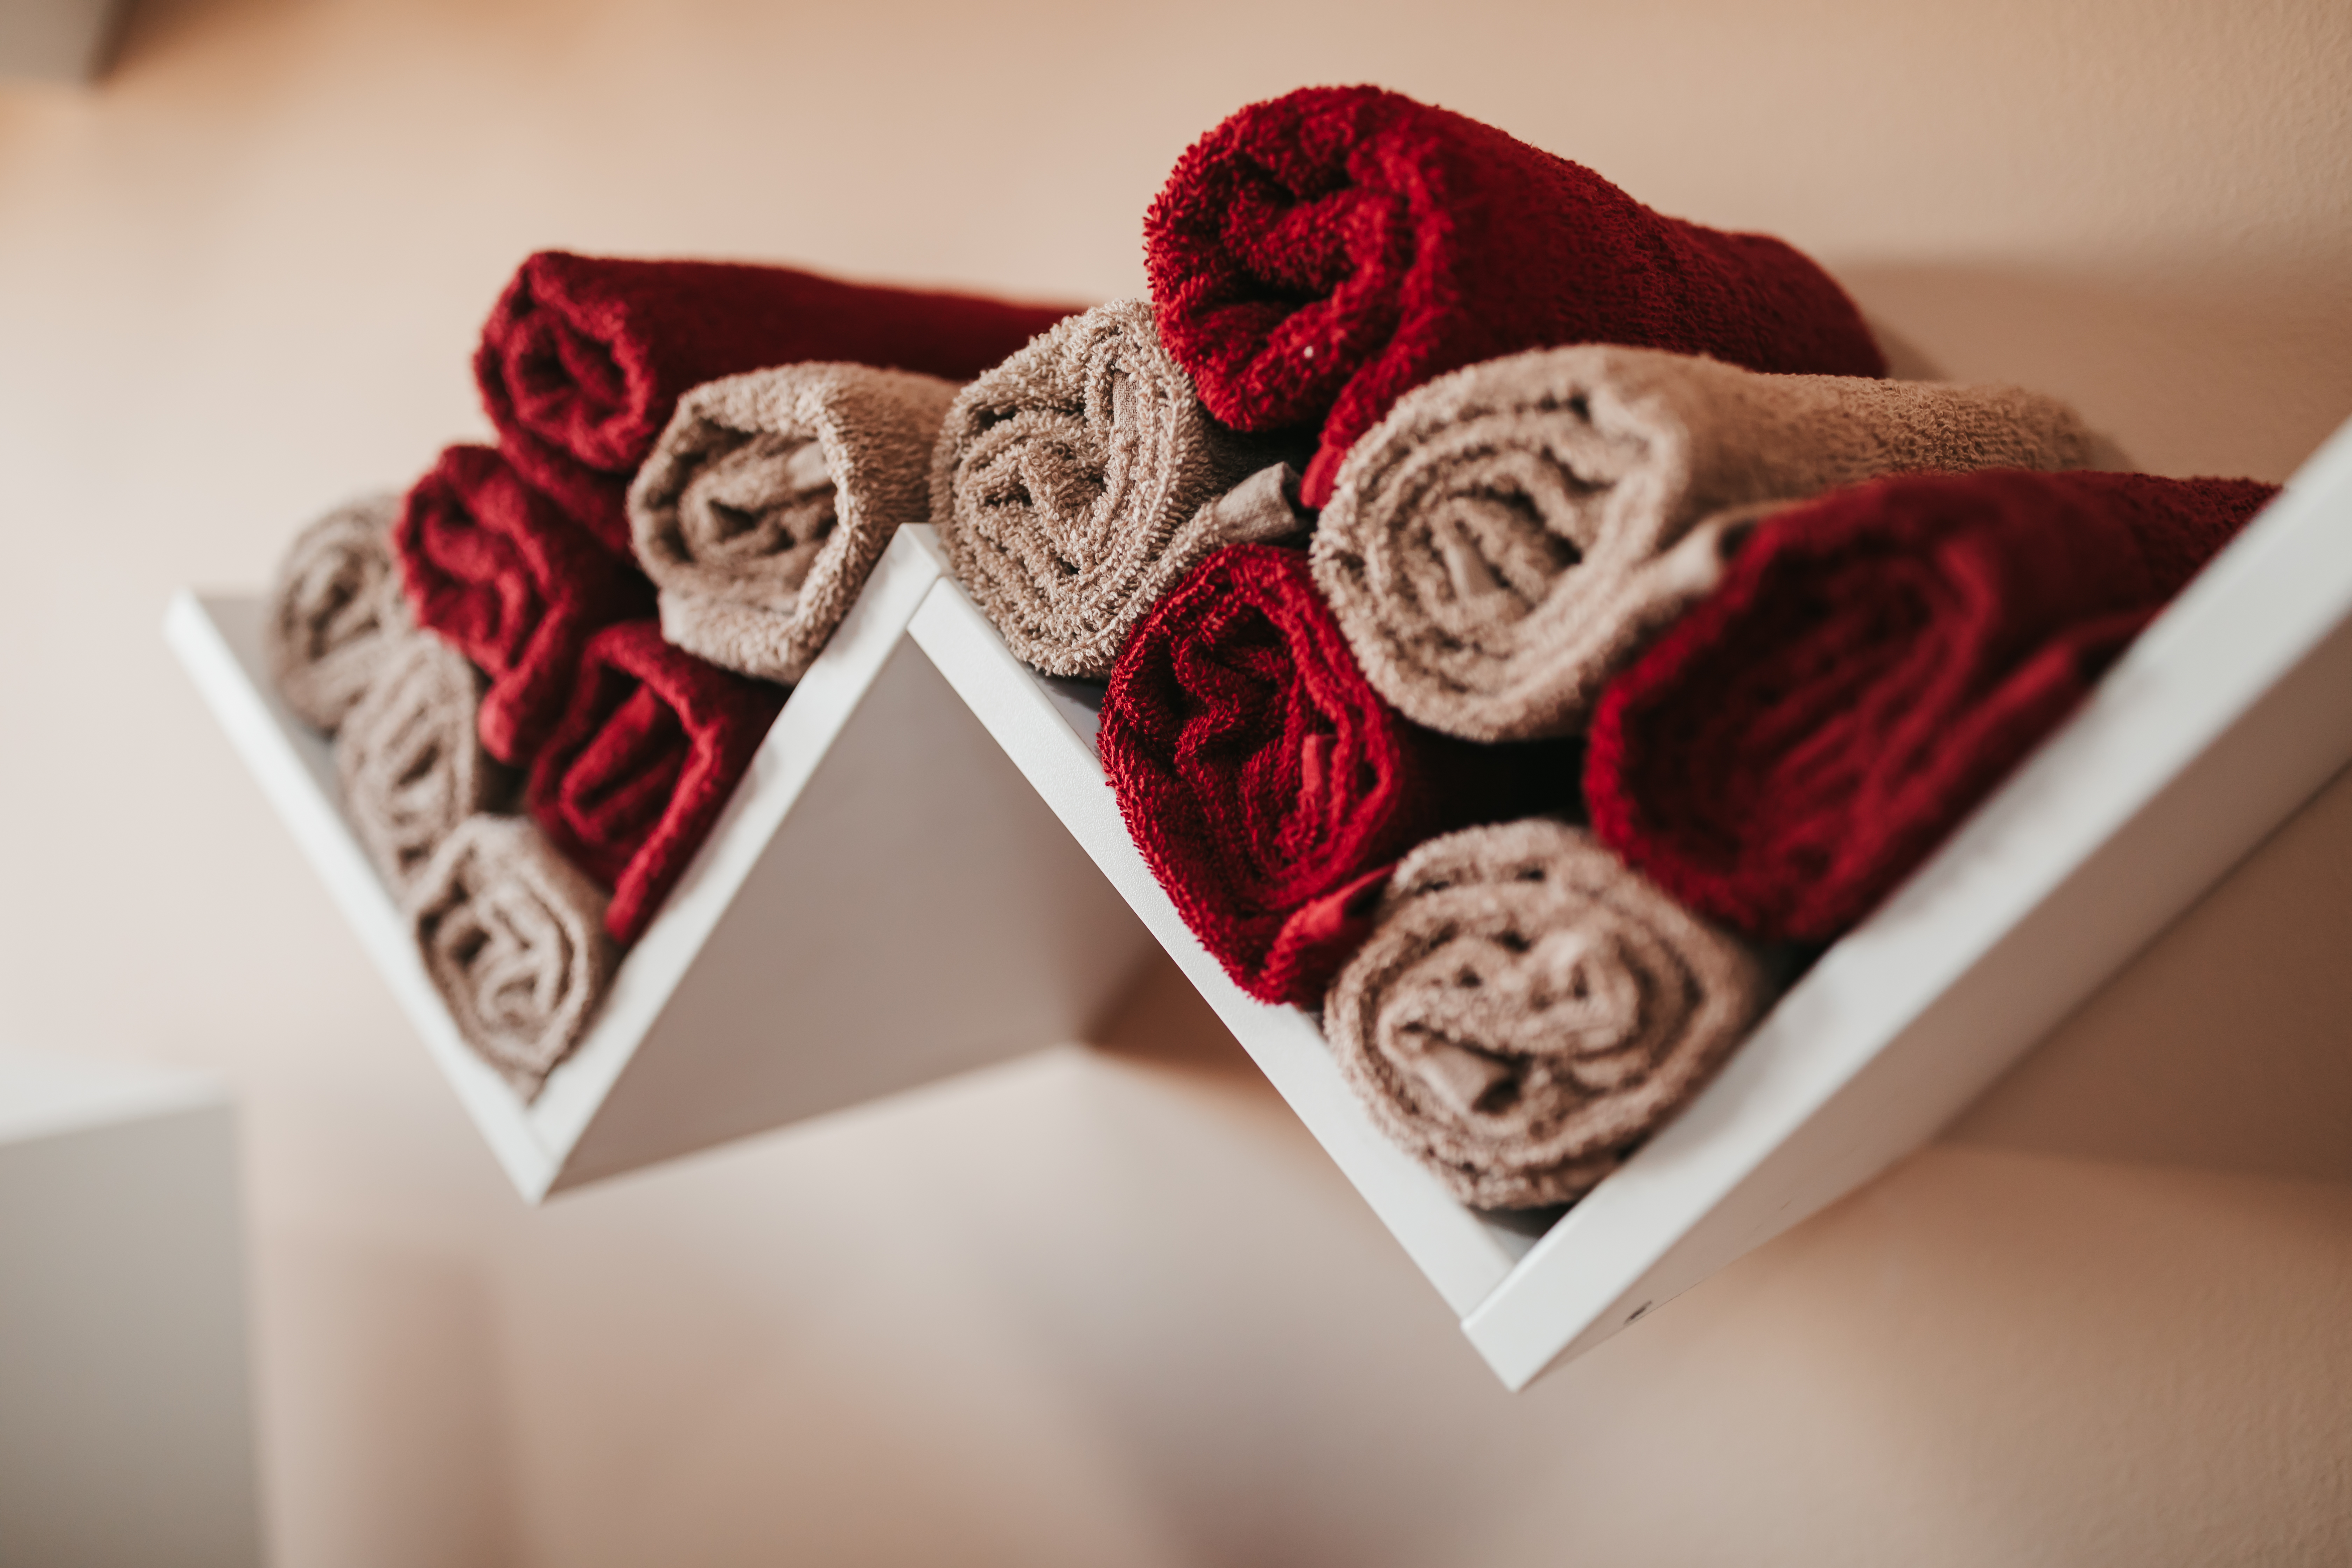 Red and brown rolled hand towels organized on floating diagonal wall shelves 